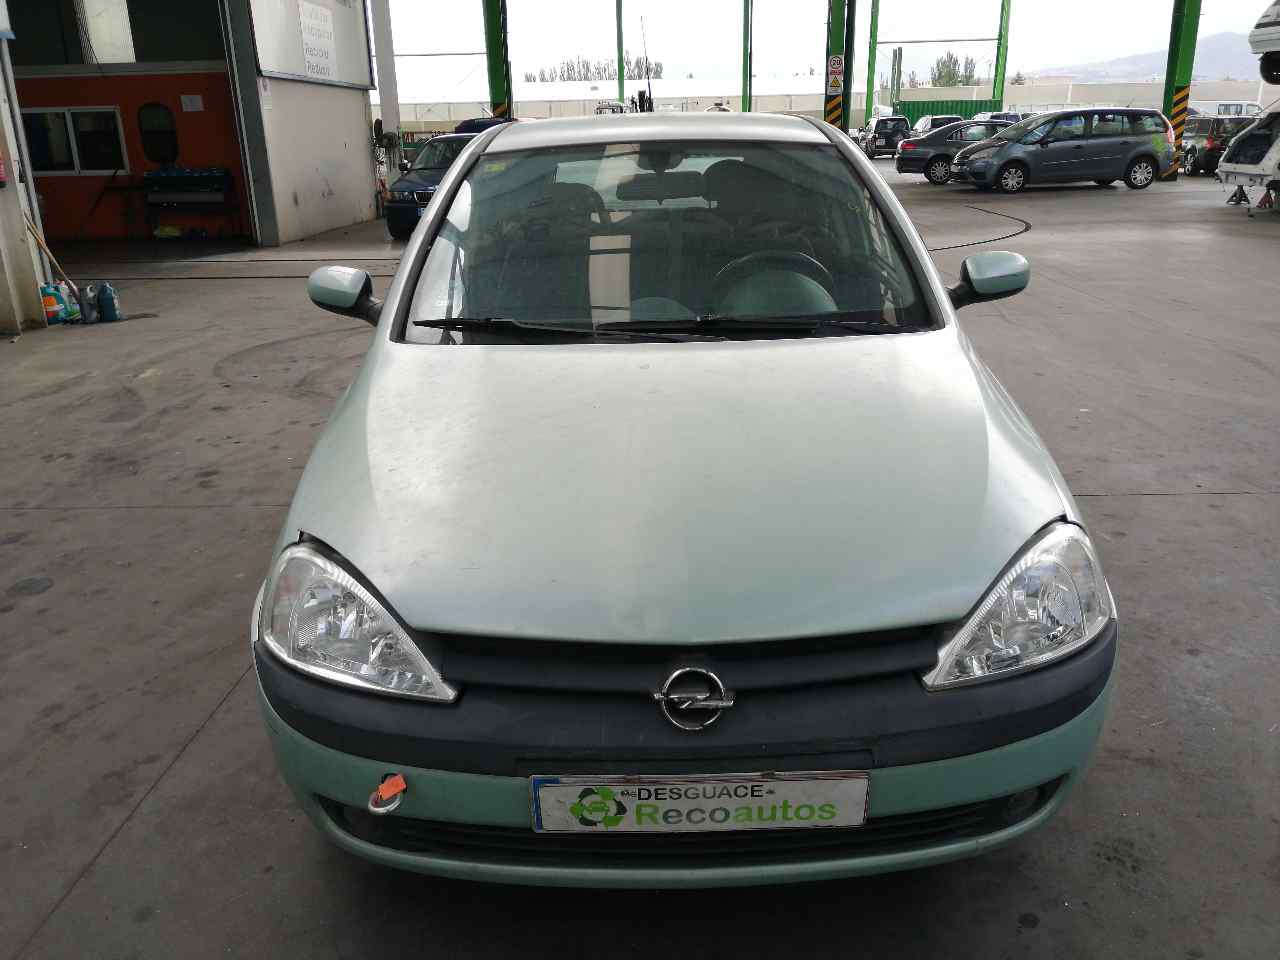 OPEL Corsa C (2000-2006) Other Interior Parts 264300008R 21705369